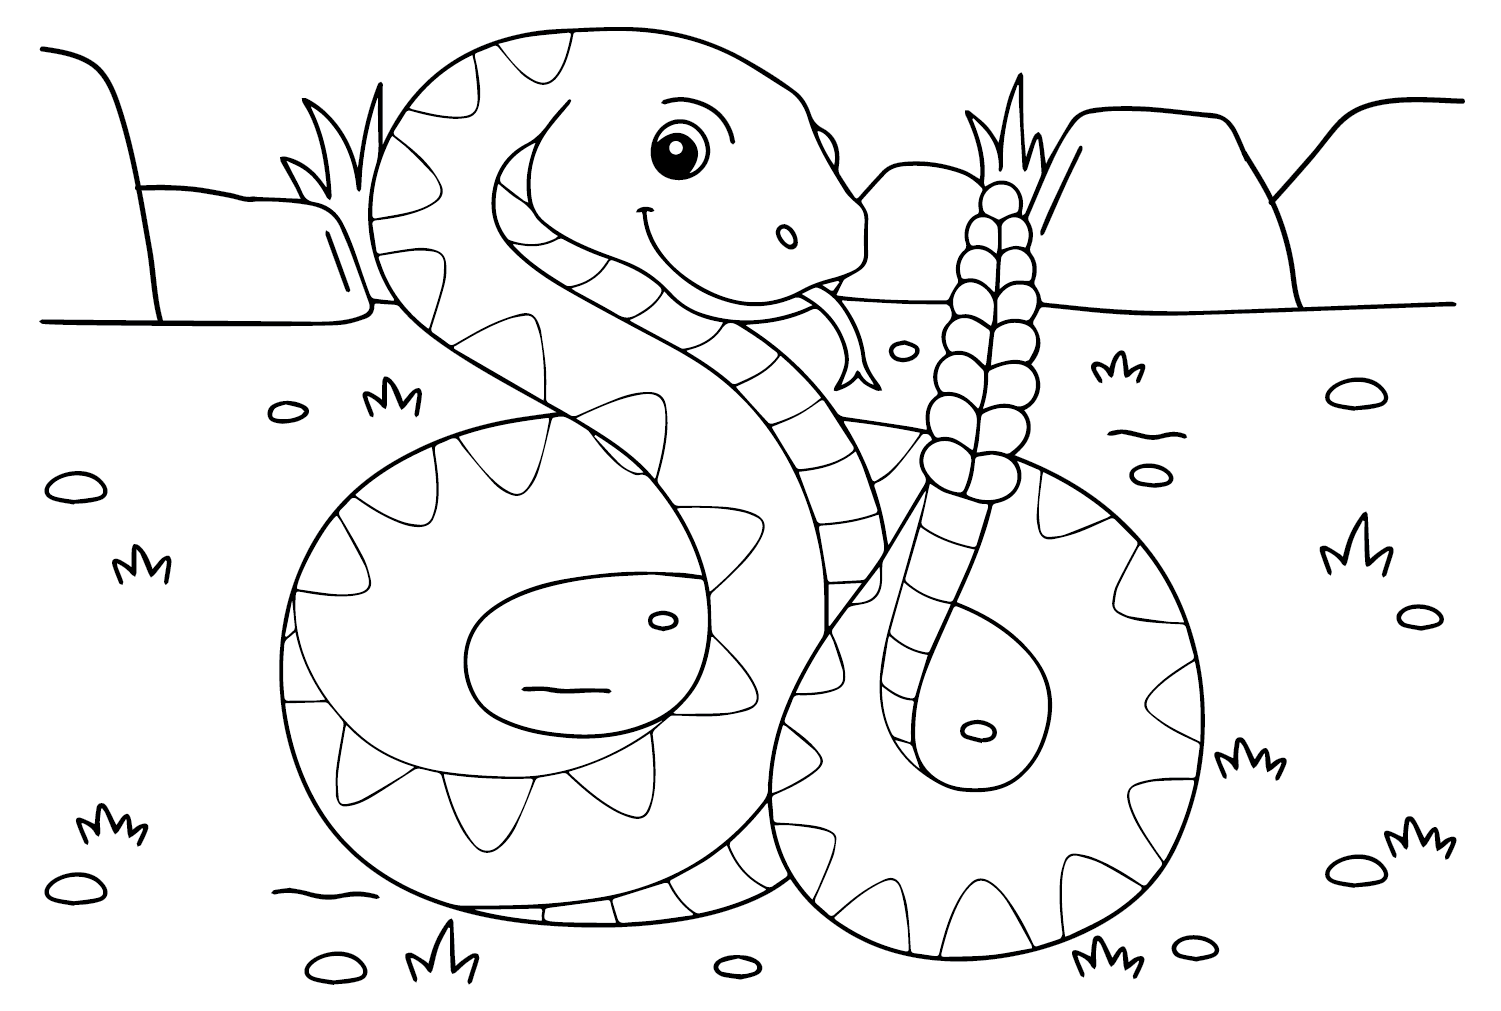 The Rattlesnake Coloring Page from Rattlesnake